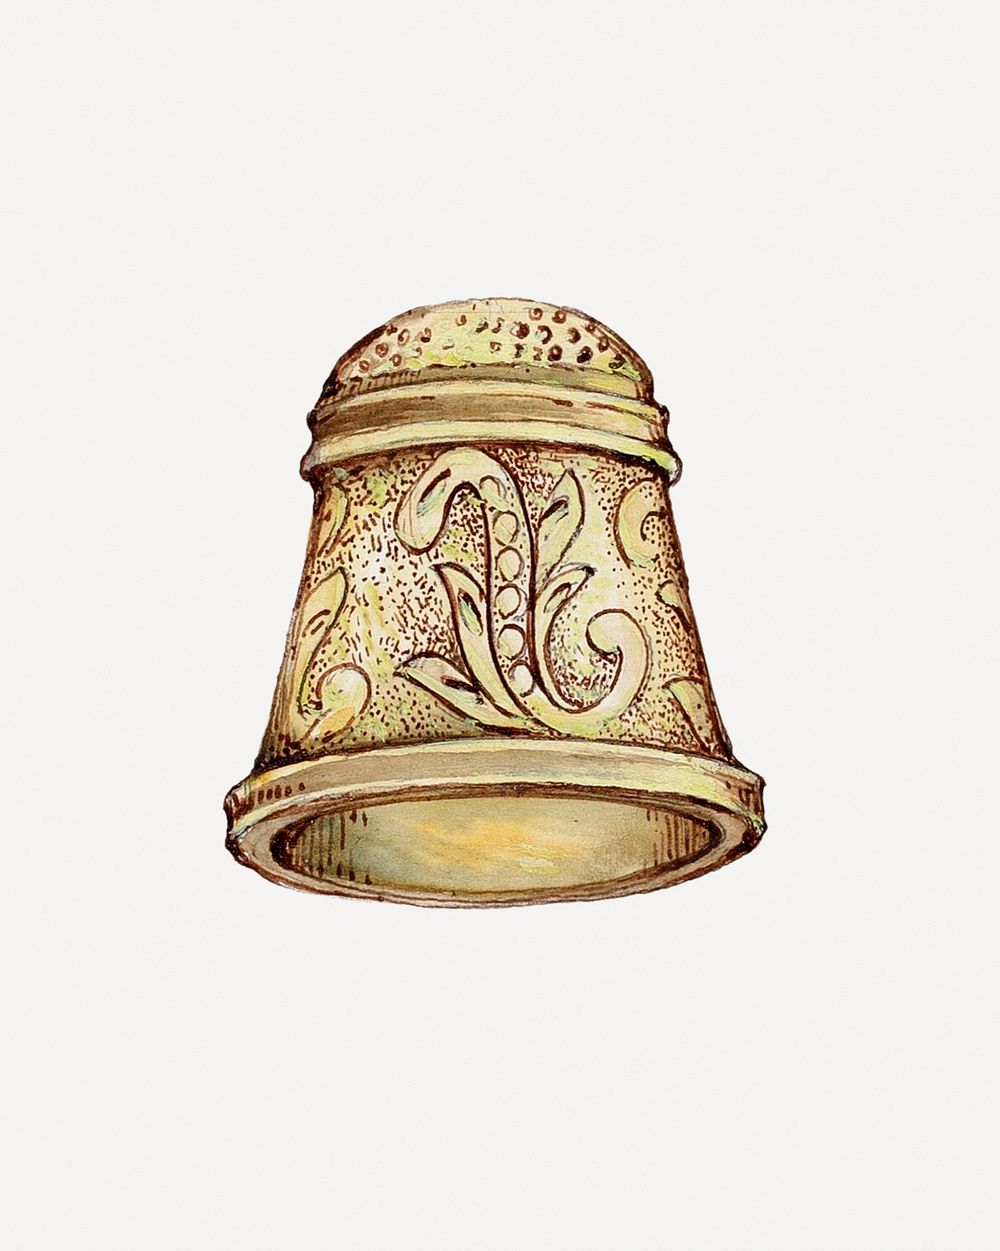 Vintage gold thimble psd illustration, remixed from the artwork by George Seideneck